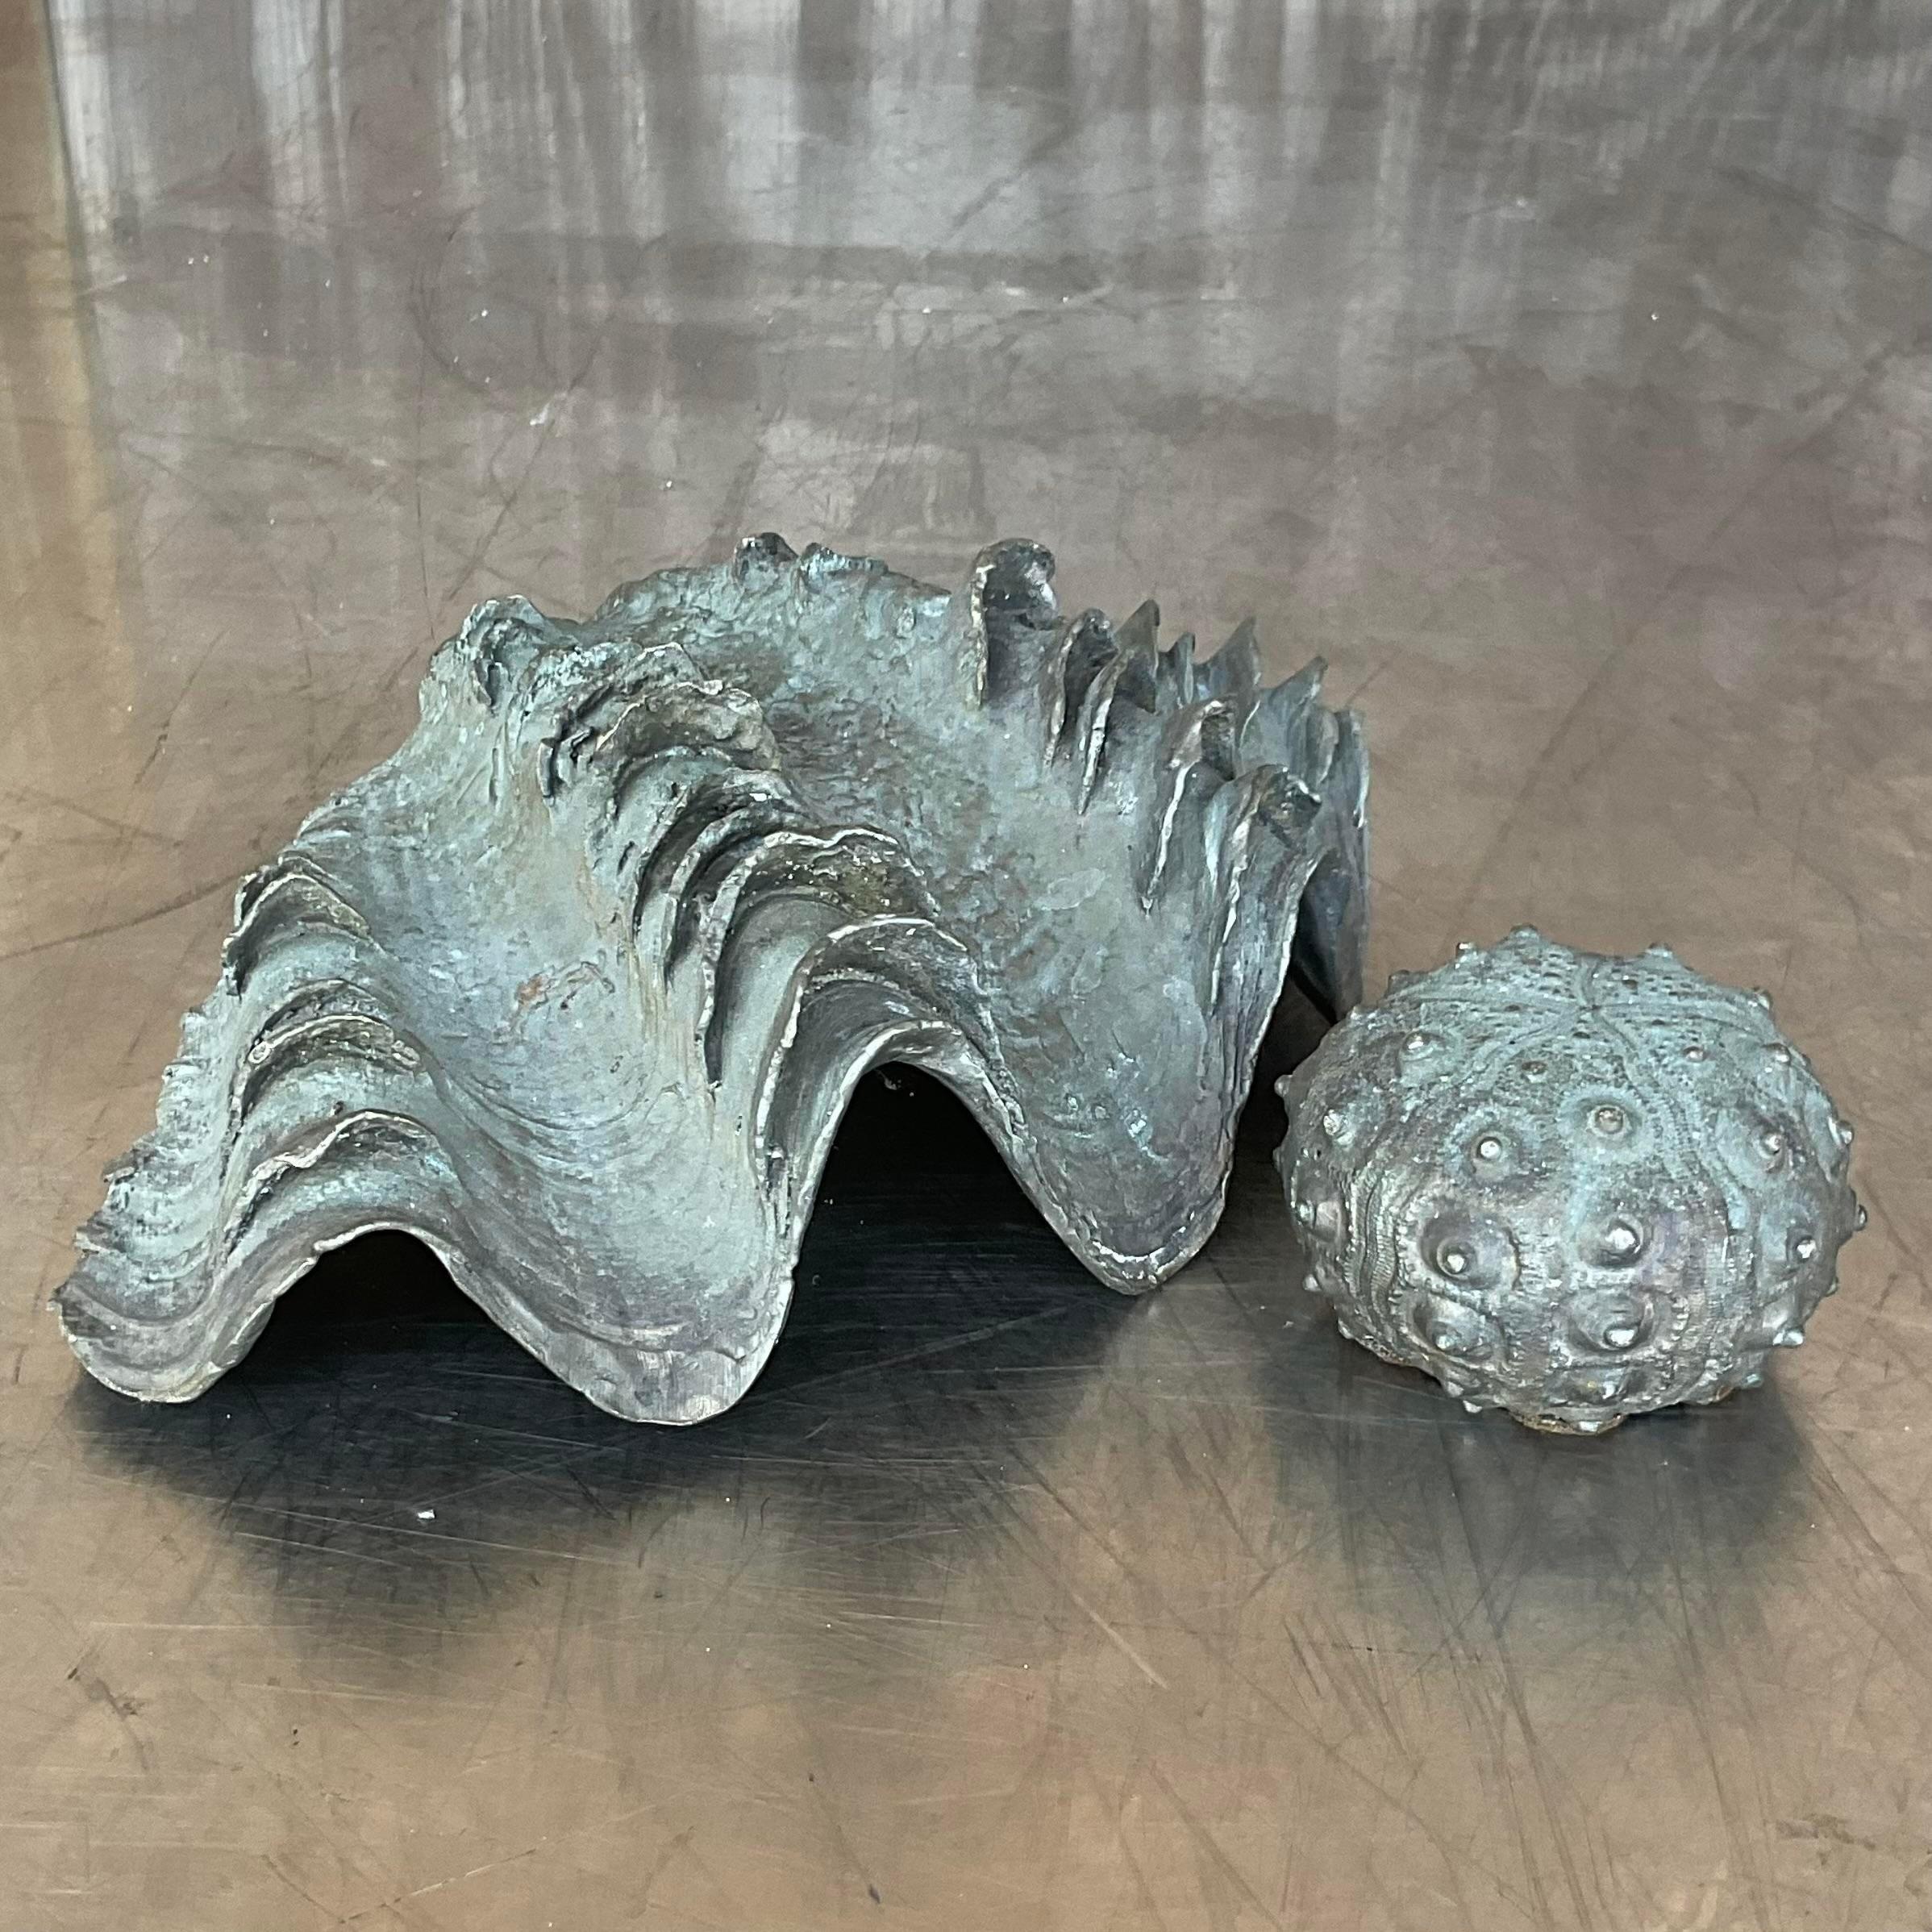 A striking vintage Coastal pair of sea creatures. Made by the iconic Maitland Smith. A bronze clam shell and his sea urchin friend. A great way to add a flash of glamour to any space. Acquired from a Palm Beach estate.